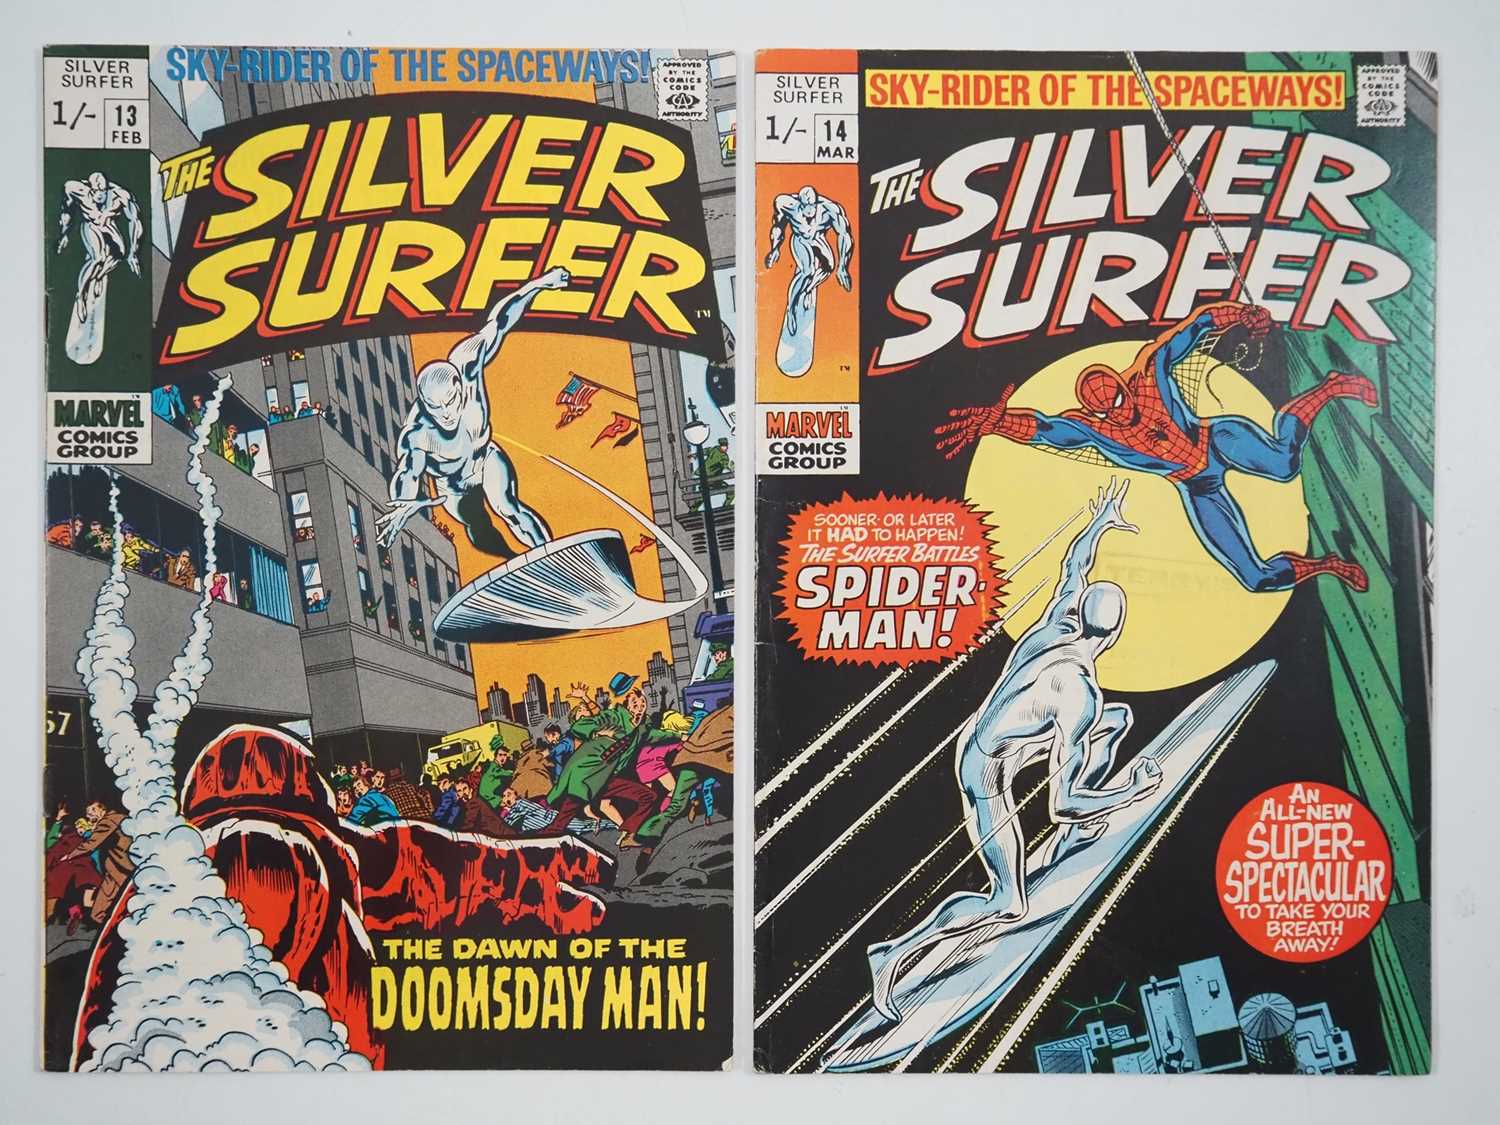 SILVER SURFER #13 & 14 (2 in Lot) - (1970 - MARVEL - UK Price Variant) - Includes the first